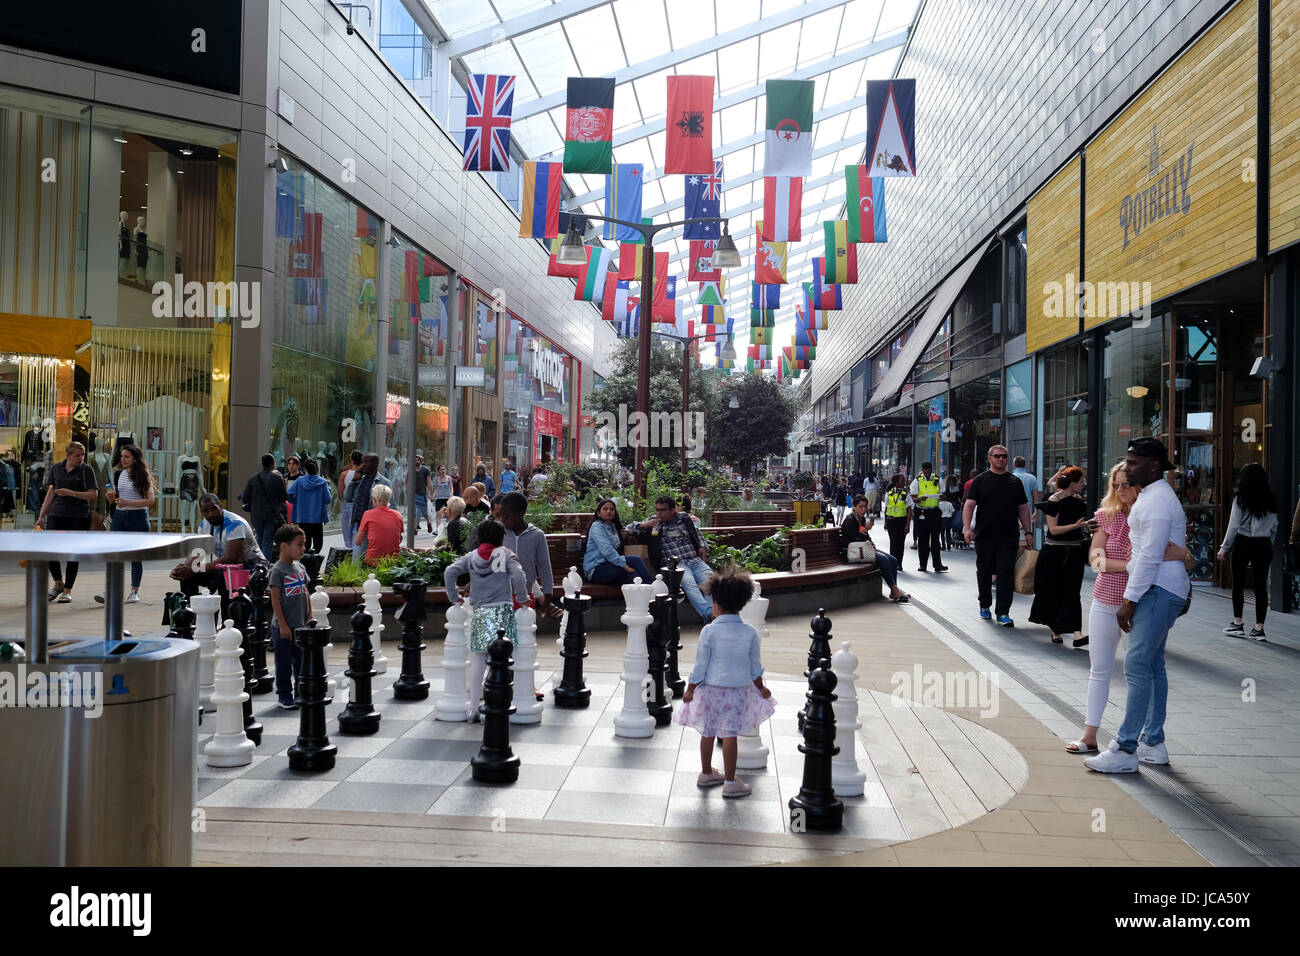 Children are playing at the chess playground in Westfield Stratford City shopping centre; World flags are hanging above along the corridor Stock Photo